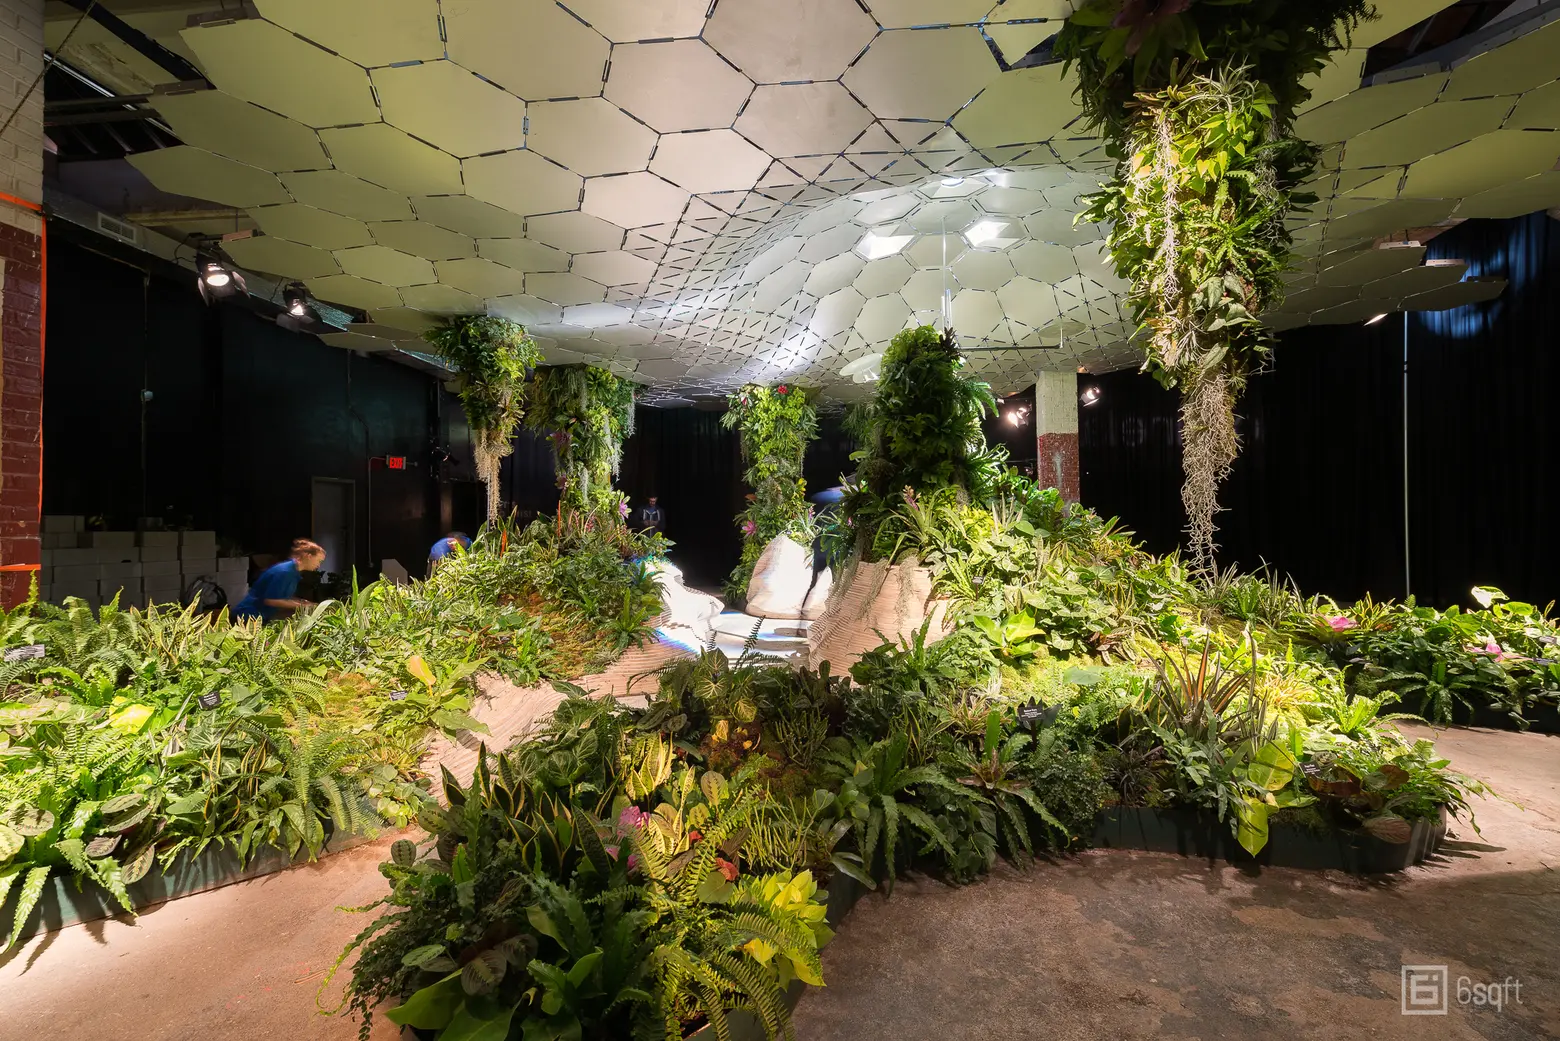 The Lowline goes into ‘dormancy’ as funds dry up